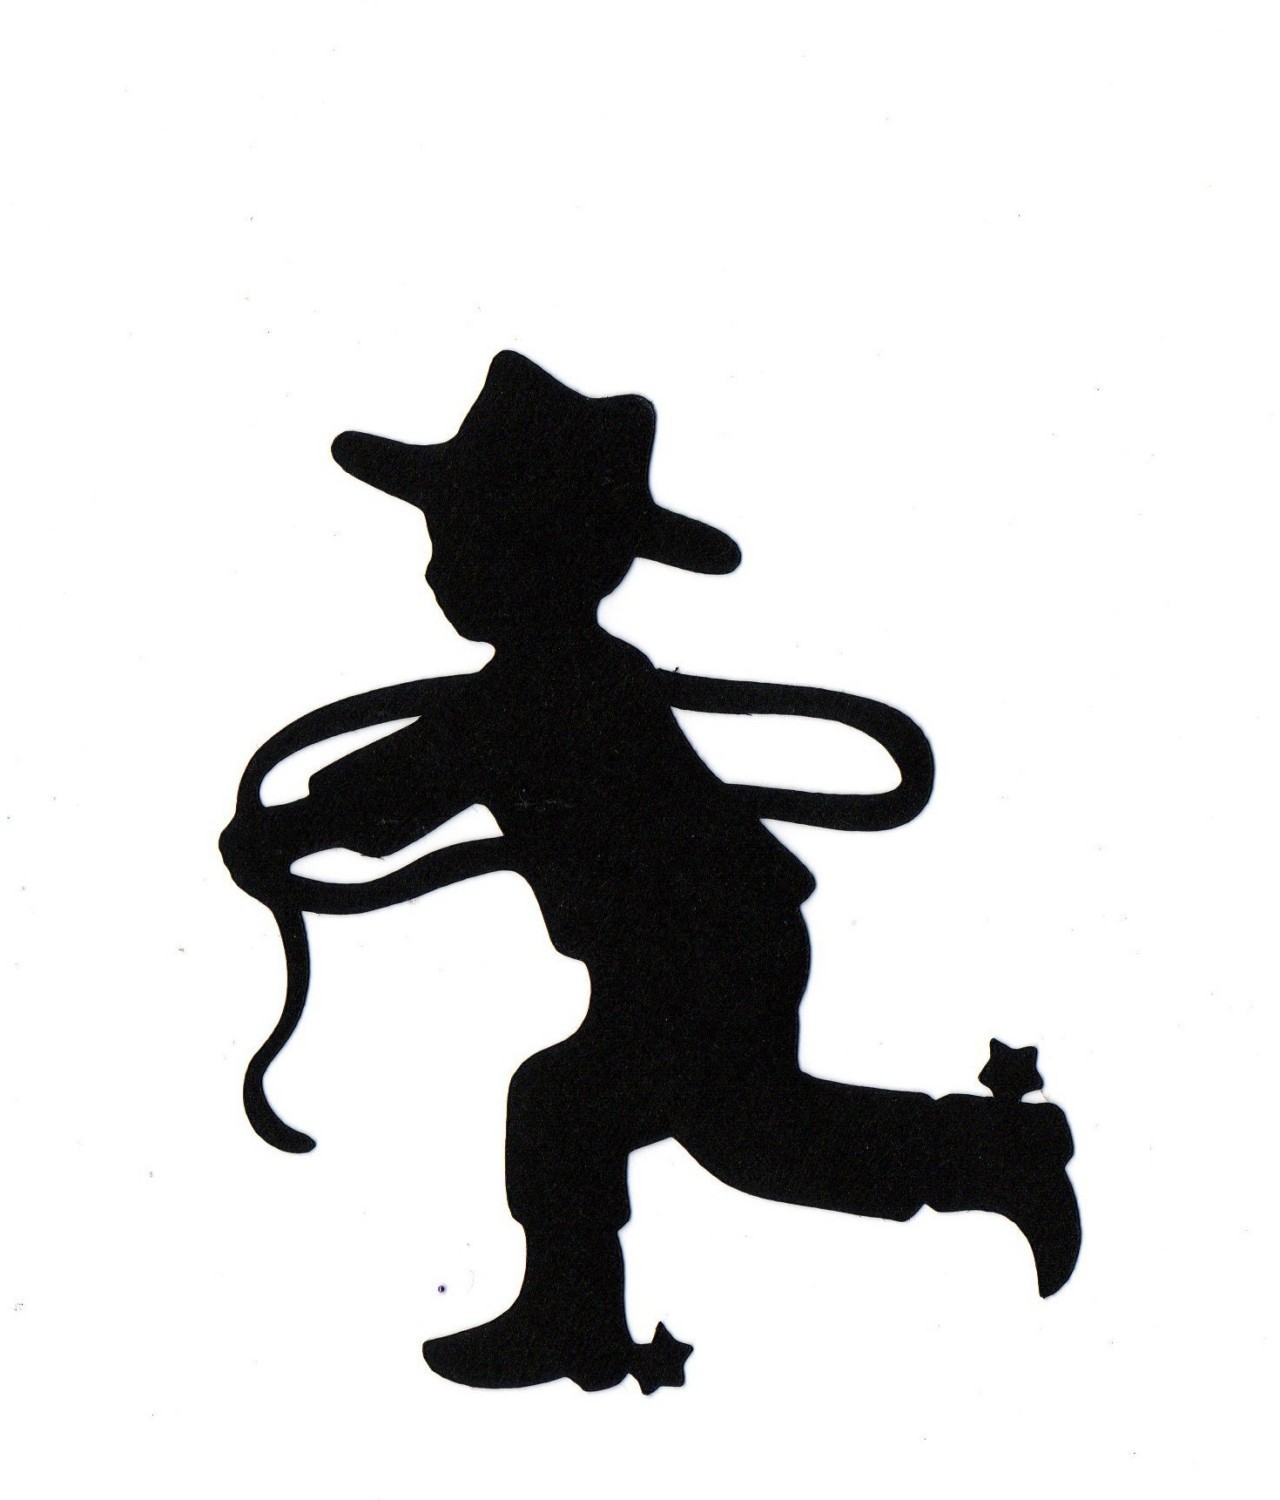 Little Cowboy Child Silhouette die cut for by simplymadescrapbooks